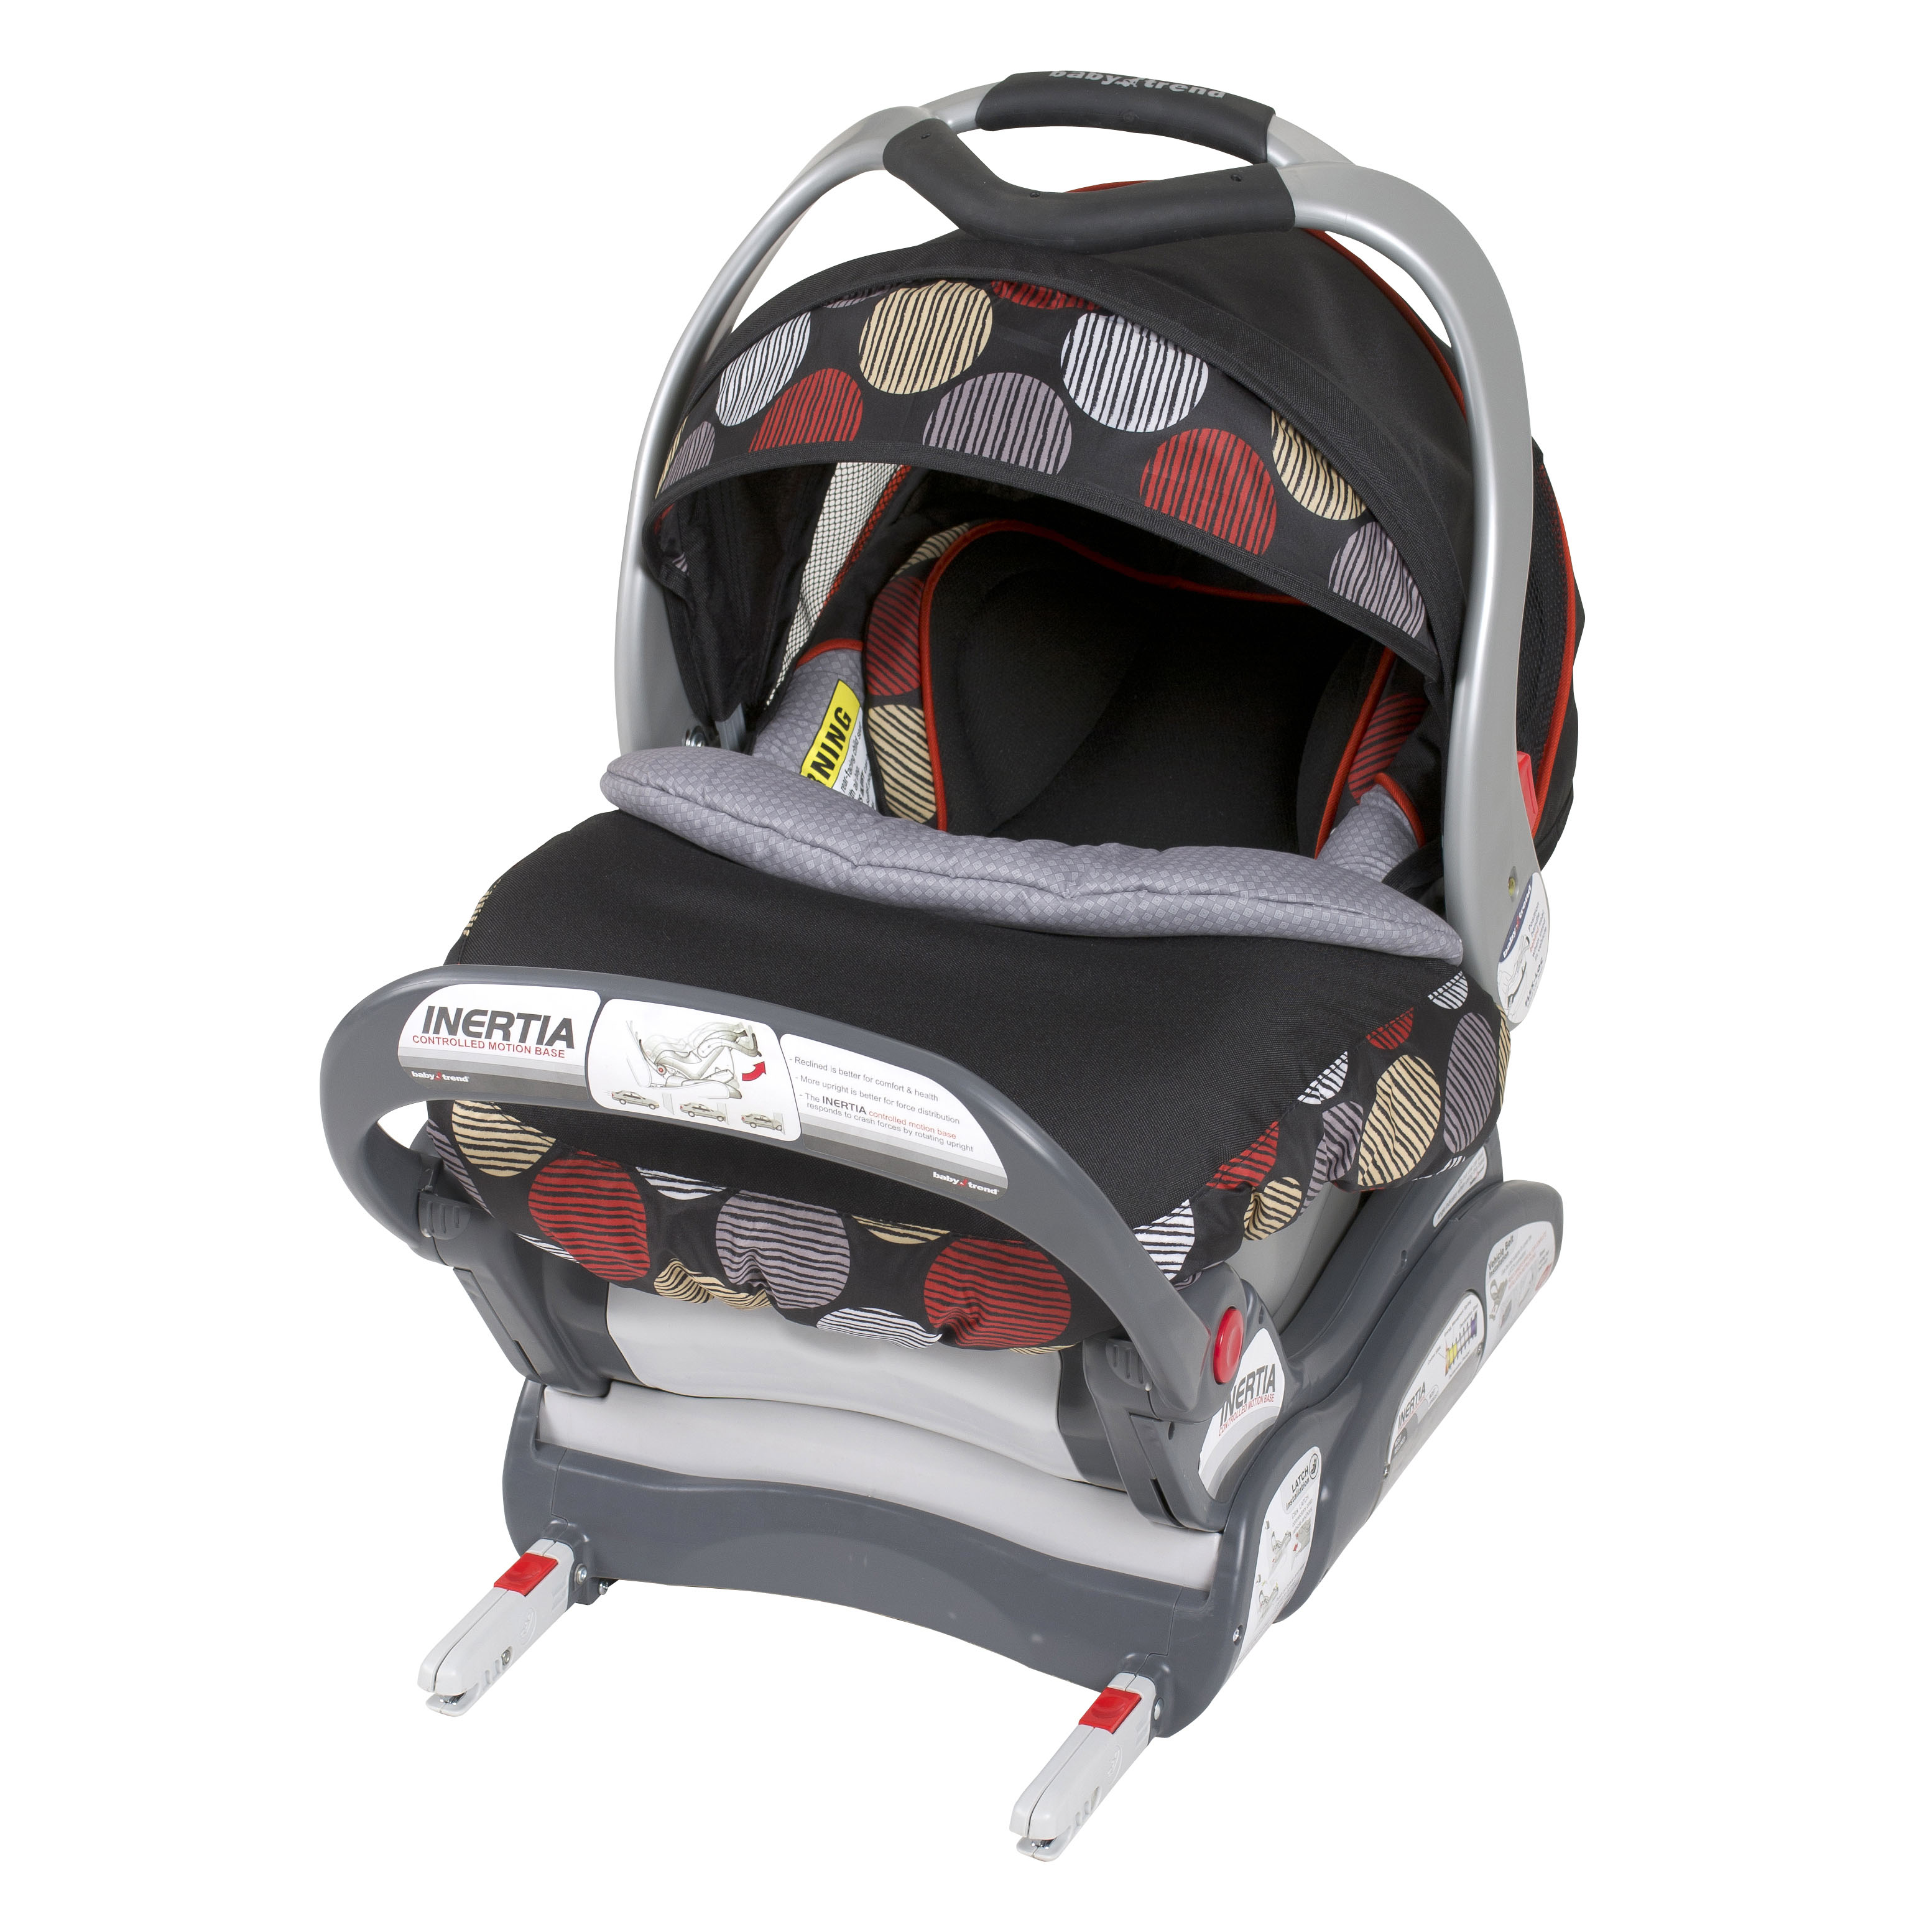 Baby Trend® Announces All Car Seats Safe to Use in Vehicle with Handle Up